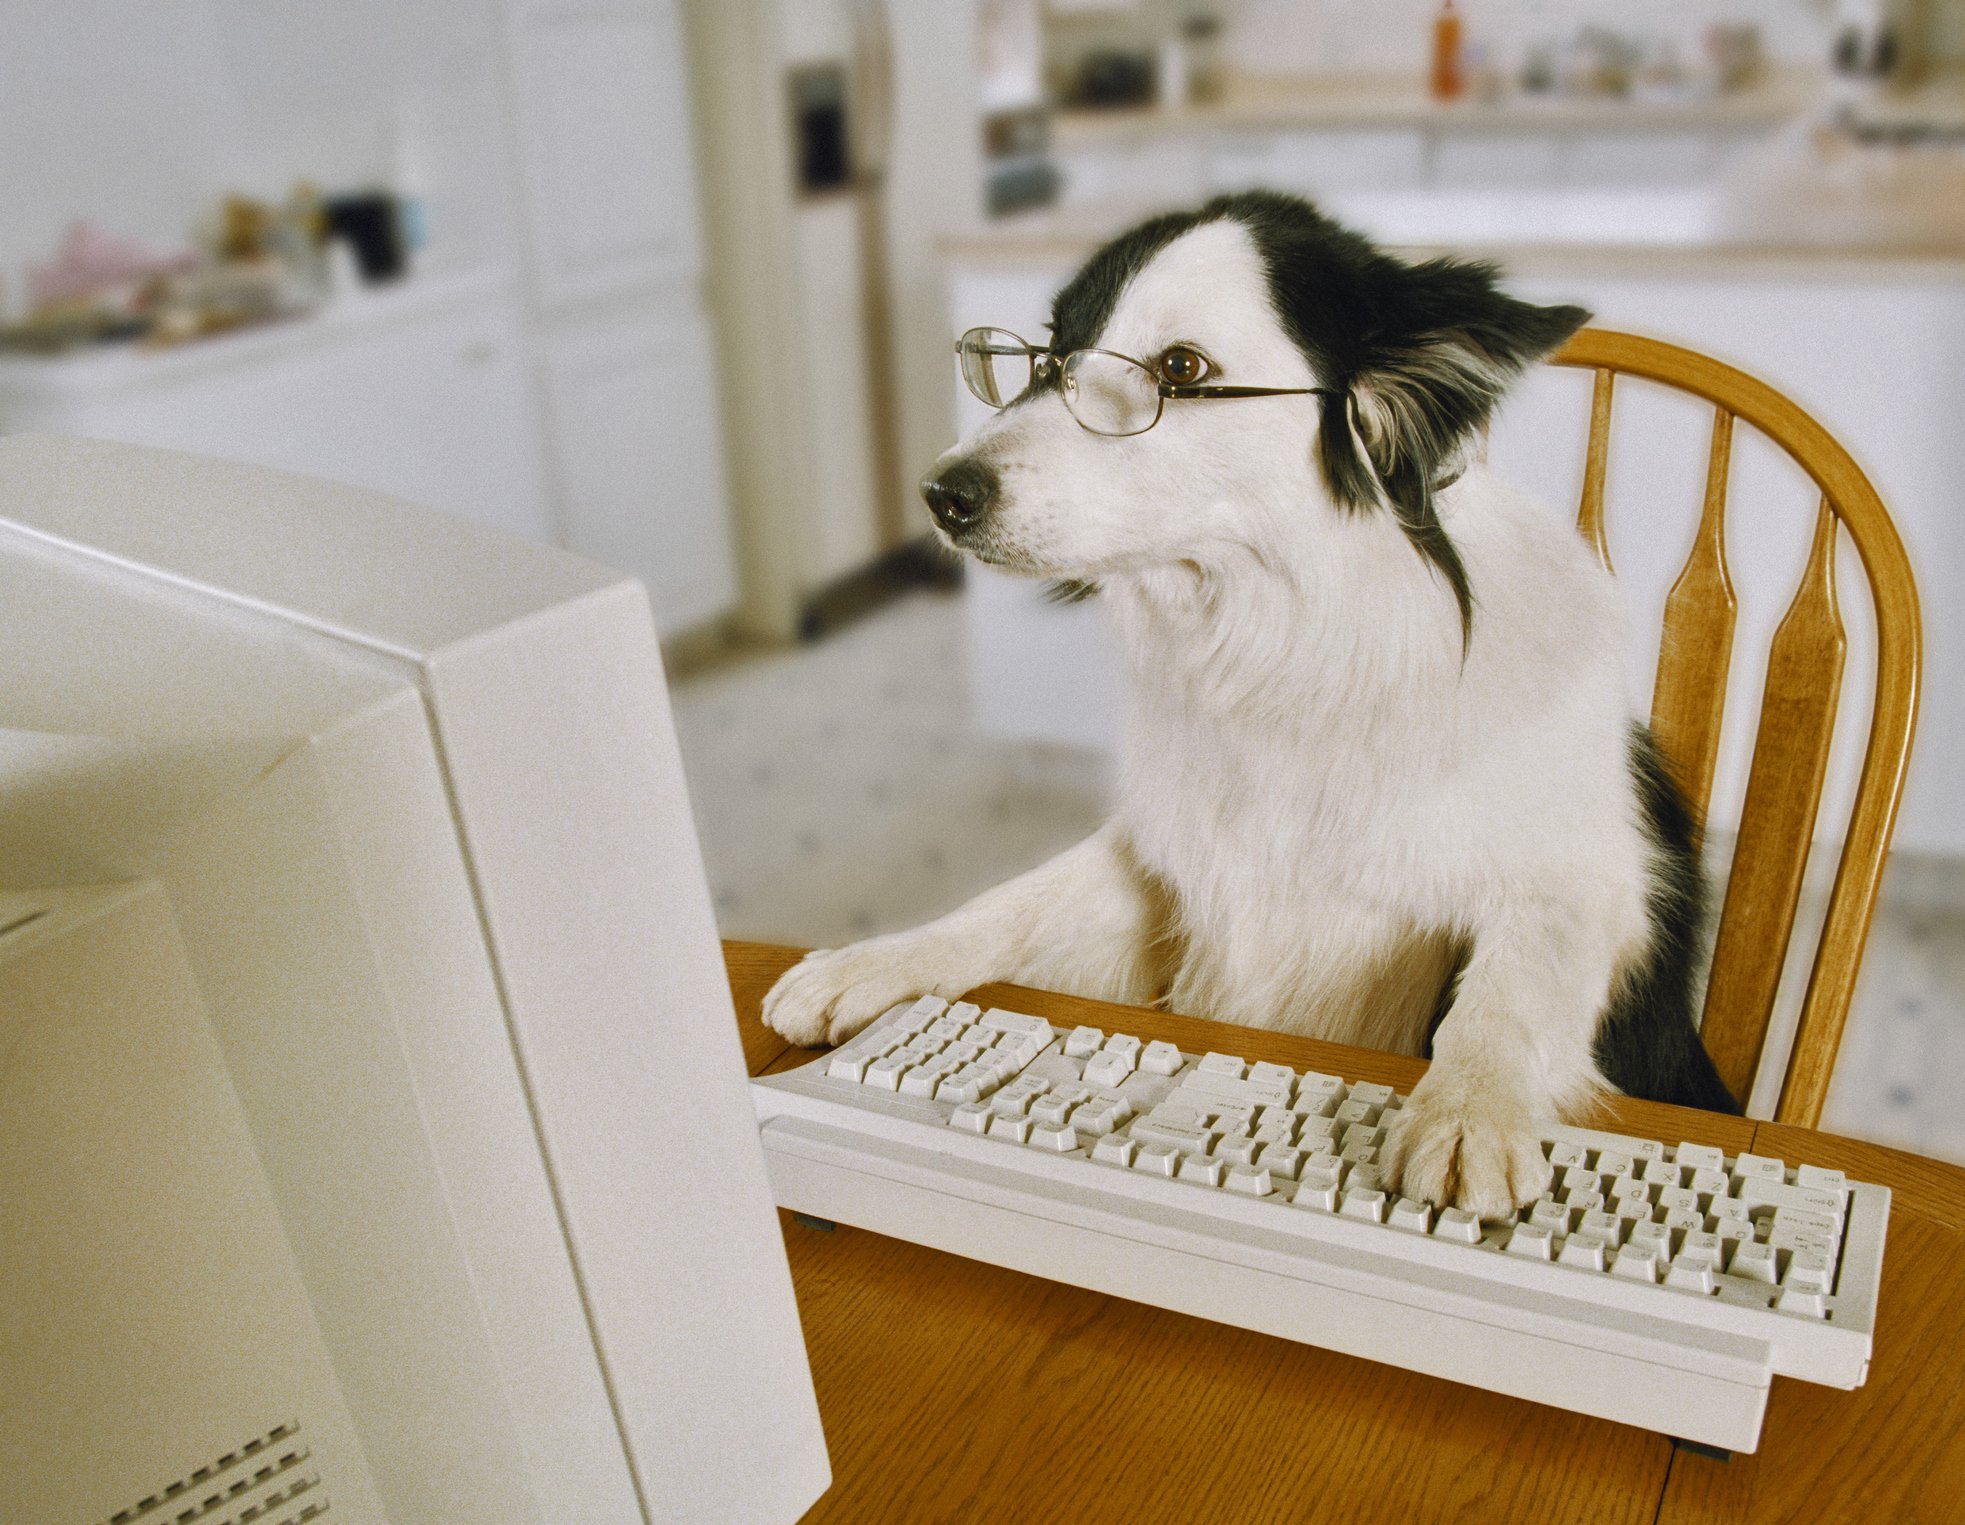 Border Collie Wearing Glasses Sitting at a Table With His Paw on a Keyboard. | Photo: Getty Images